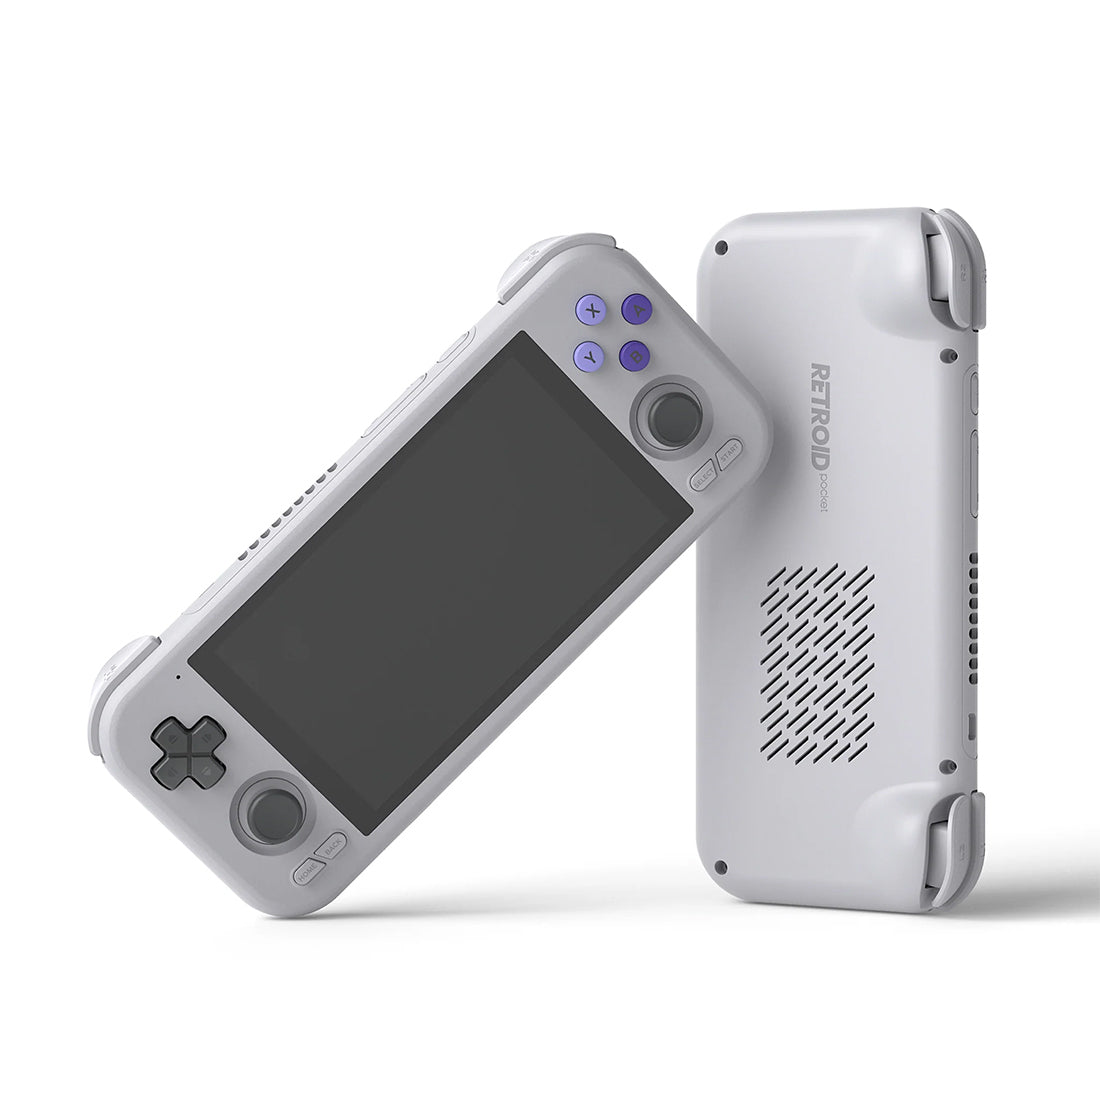 Retroid Pocket 4 Pro Android Handheld Game Console | Mechdiy